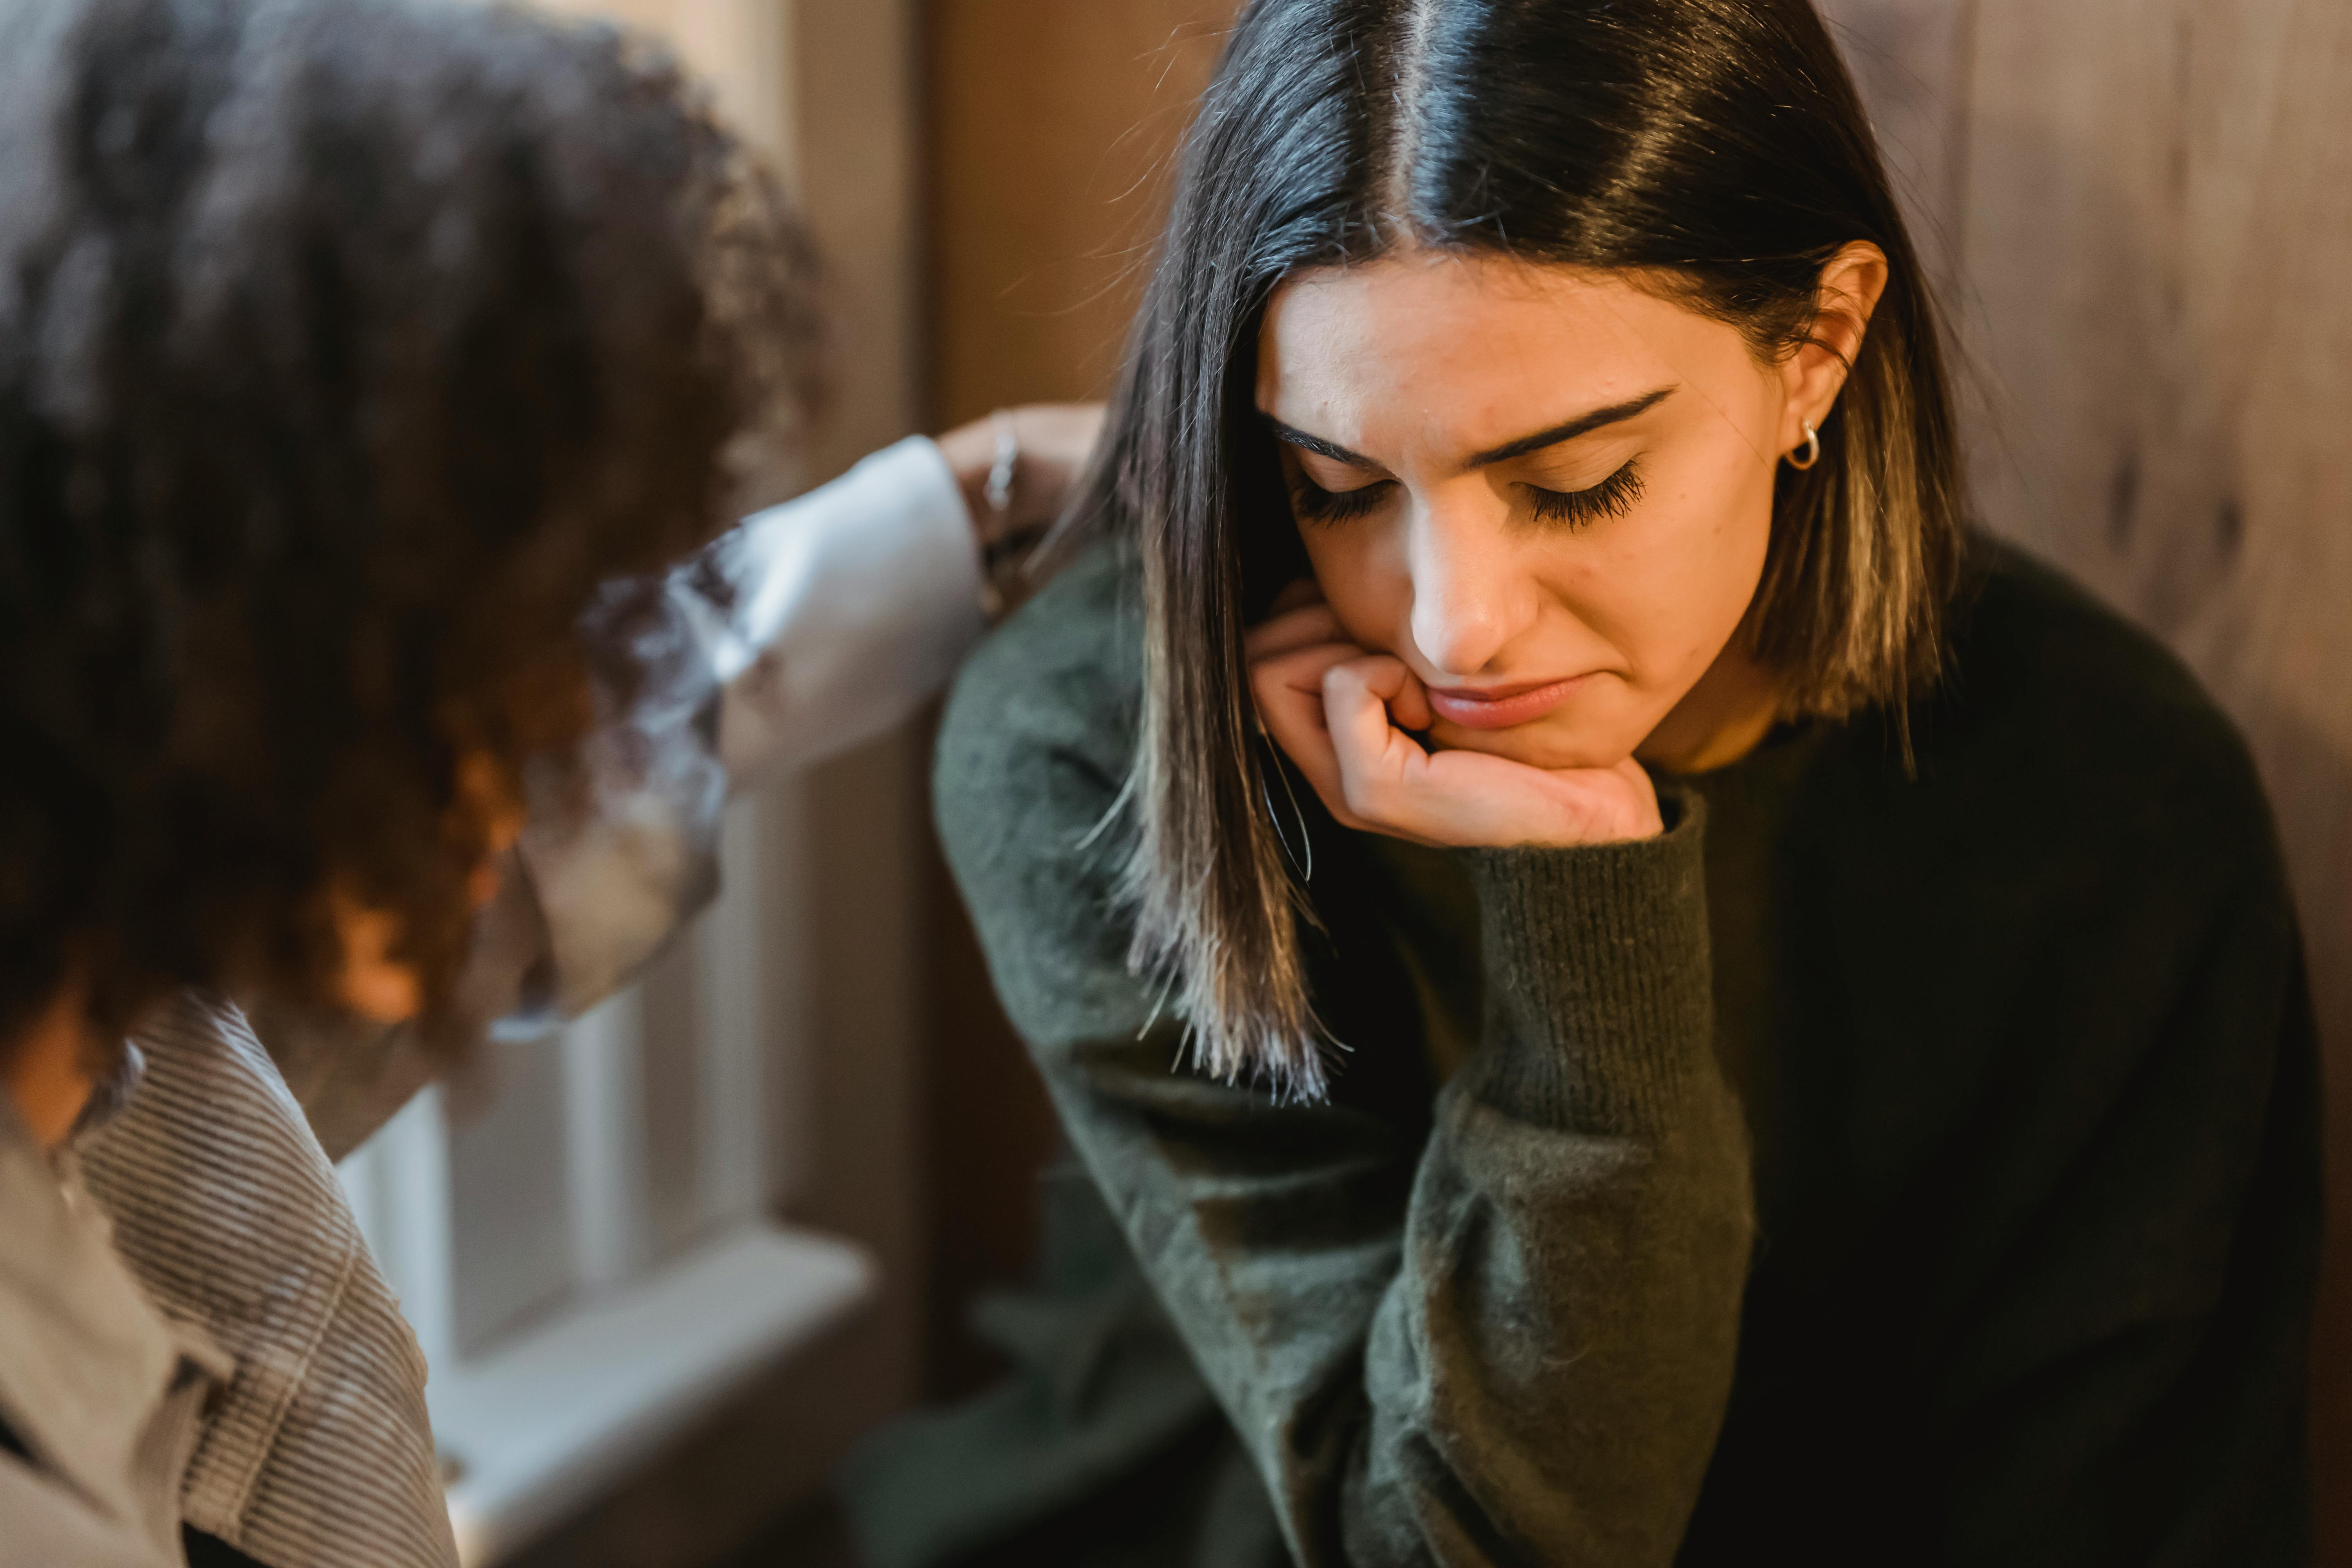 A woman getting consoled by a friend | Source: Pexels